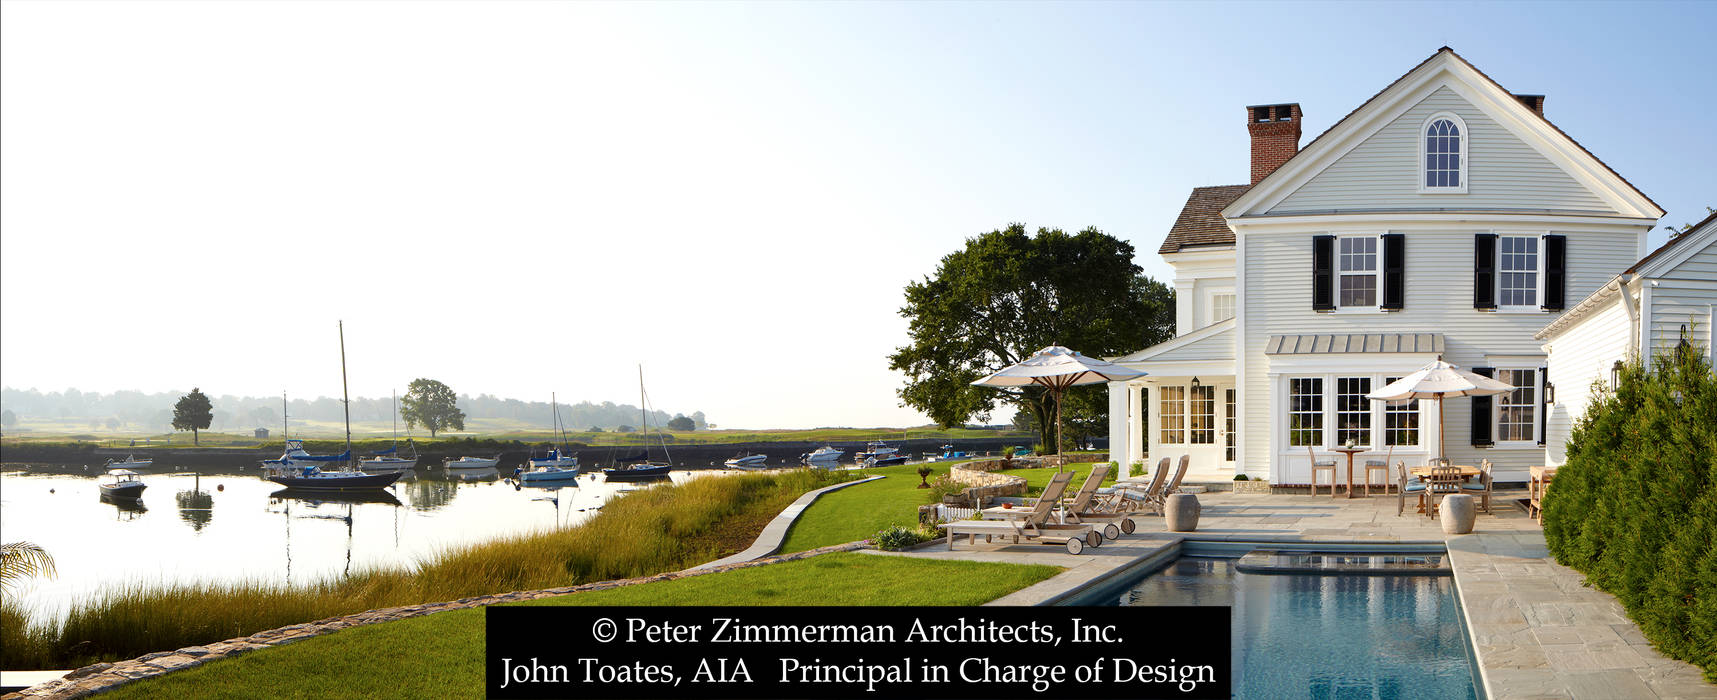 New Greek Revival House - Southport, CT, John Toates Architecture and Design John Toates Architecture and Design 클래식스타일 주택